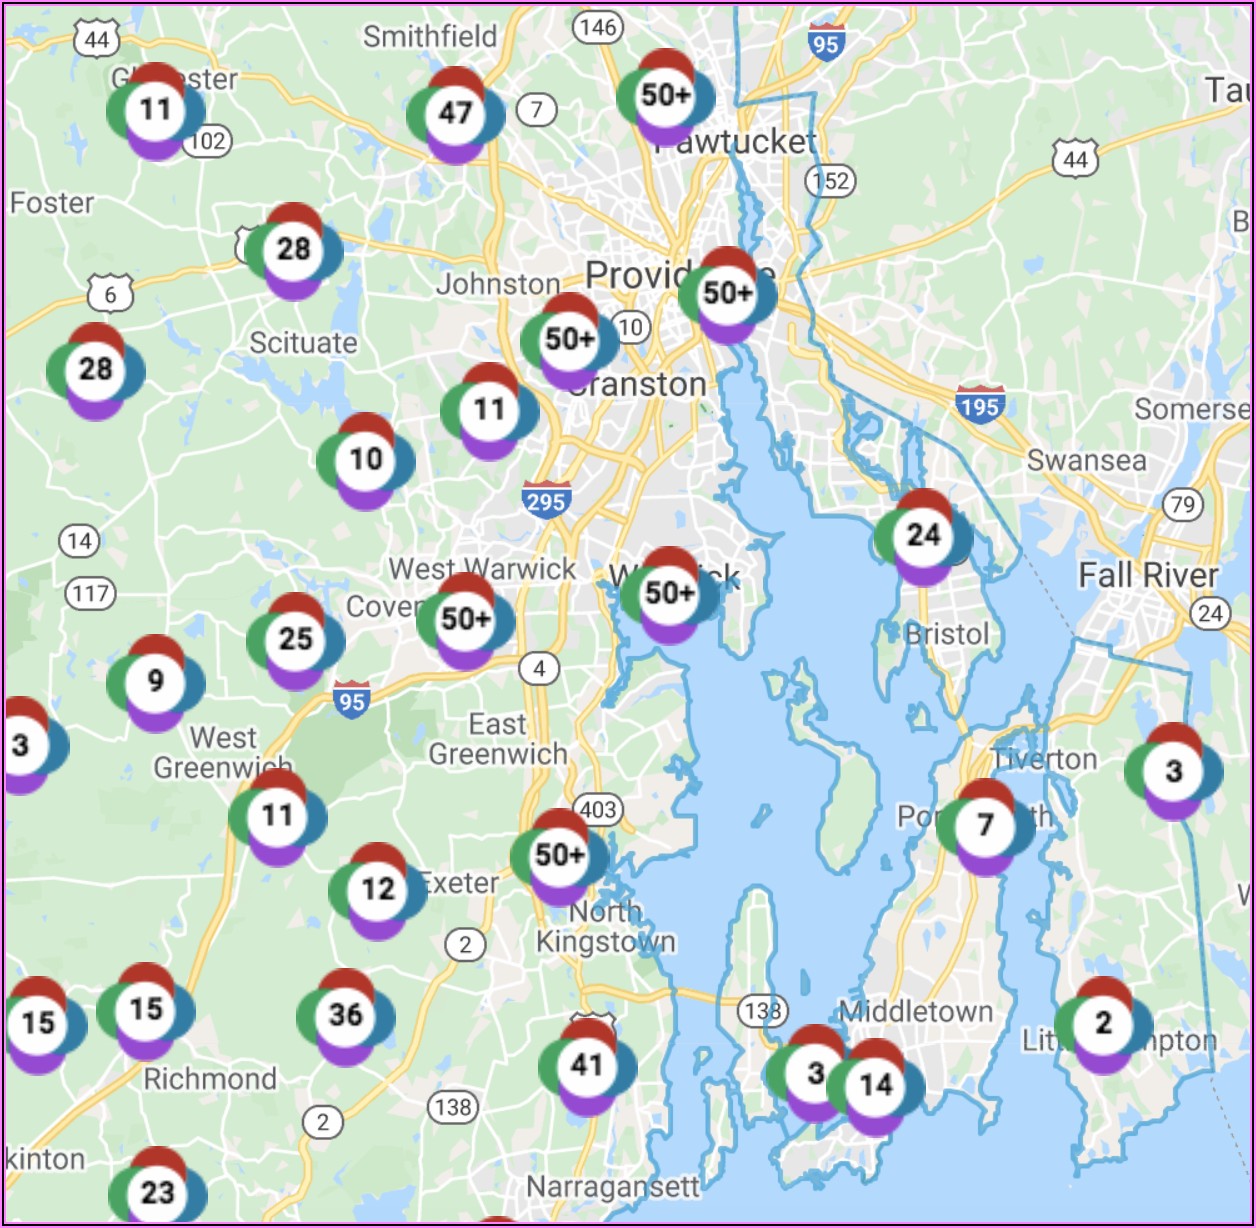 National Grid Outage Map Cumberland Ri